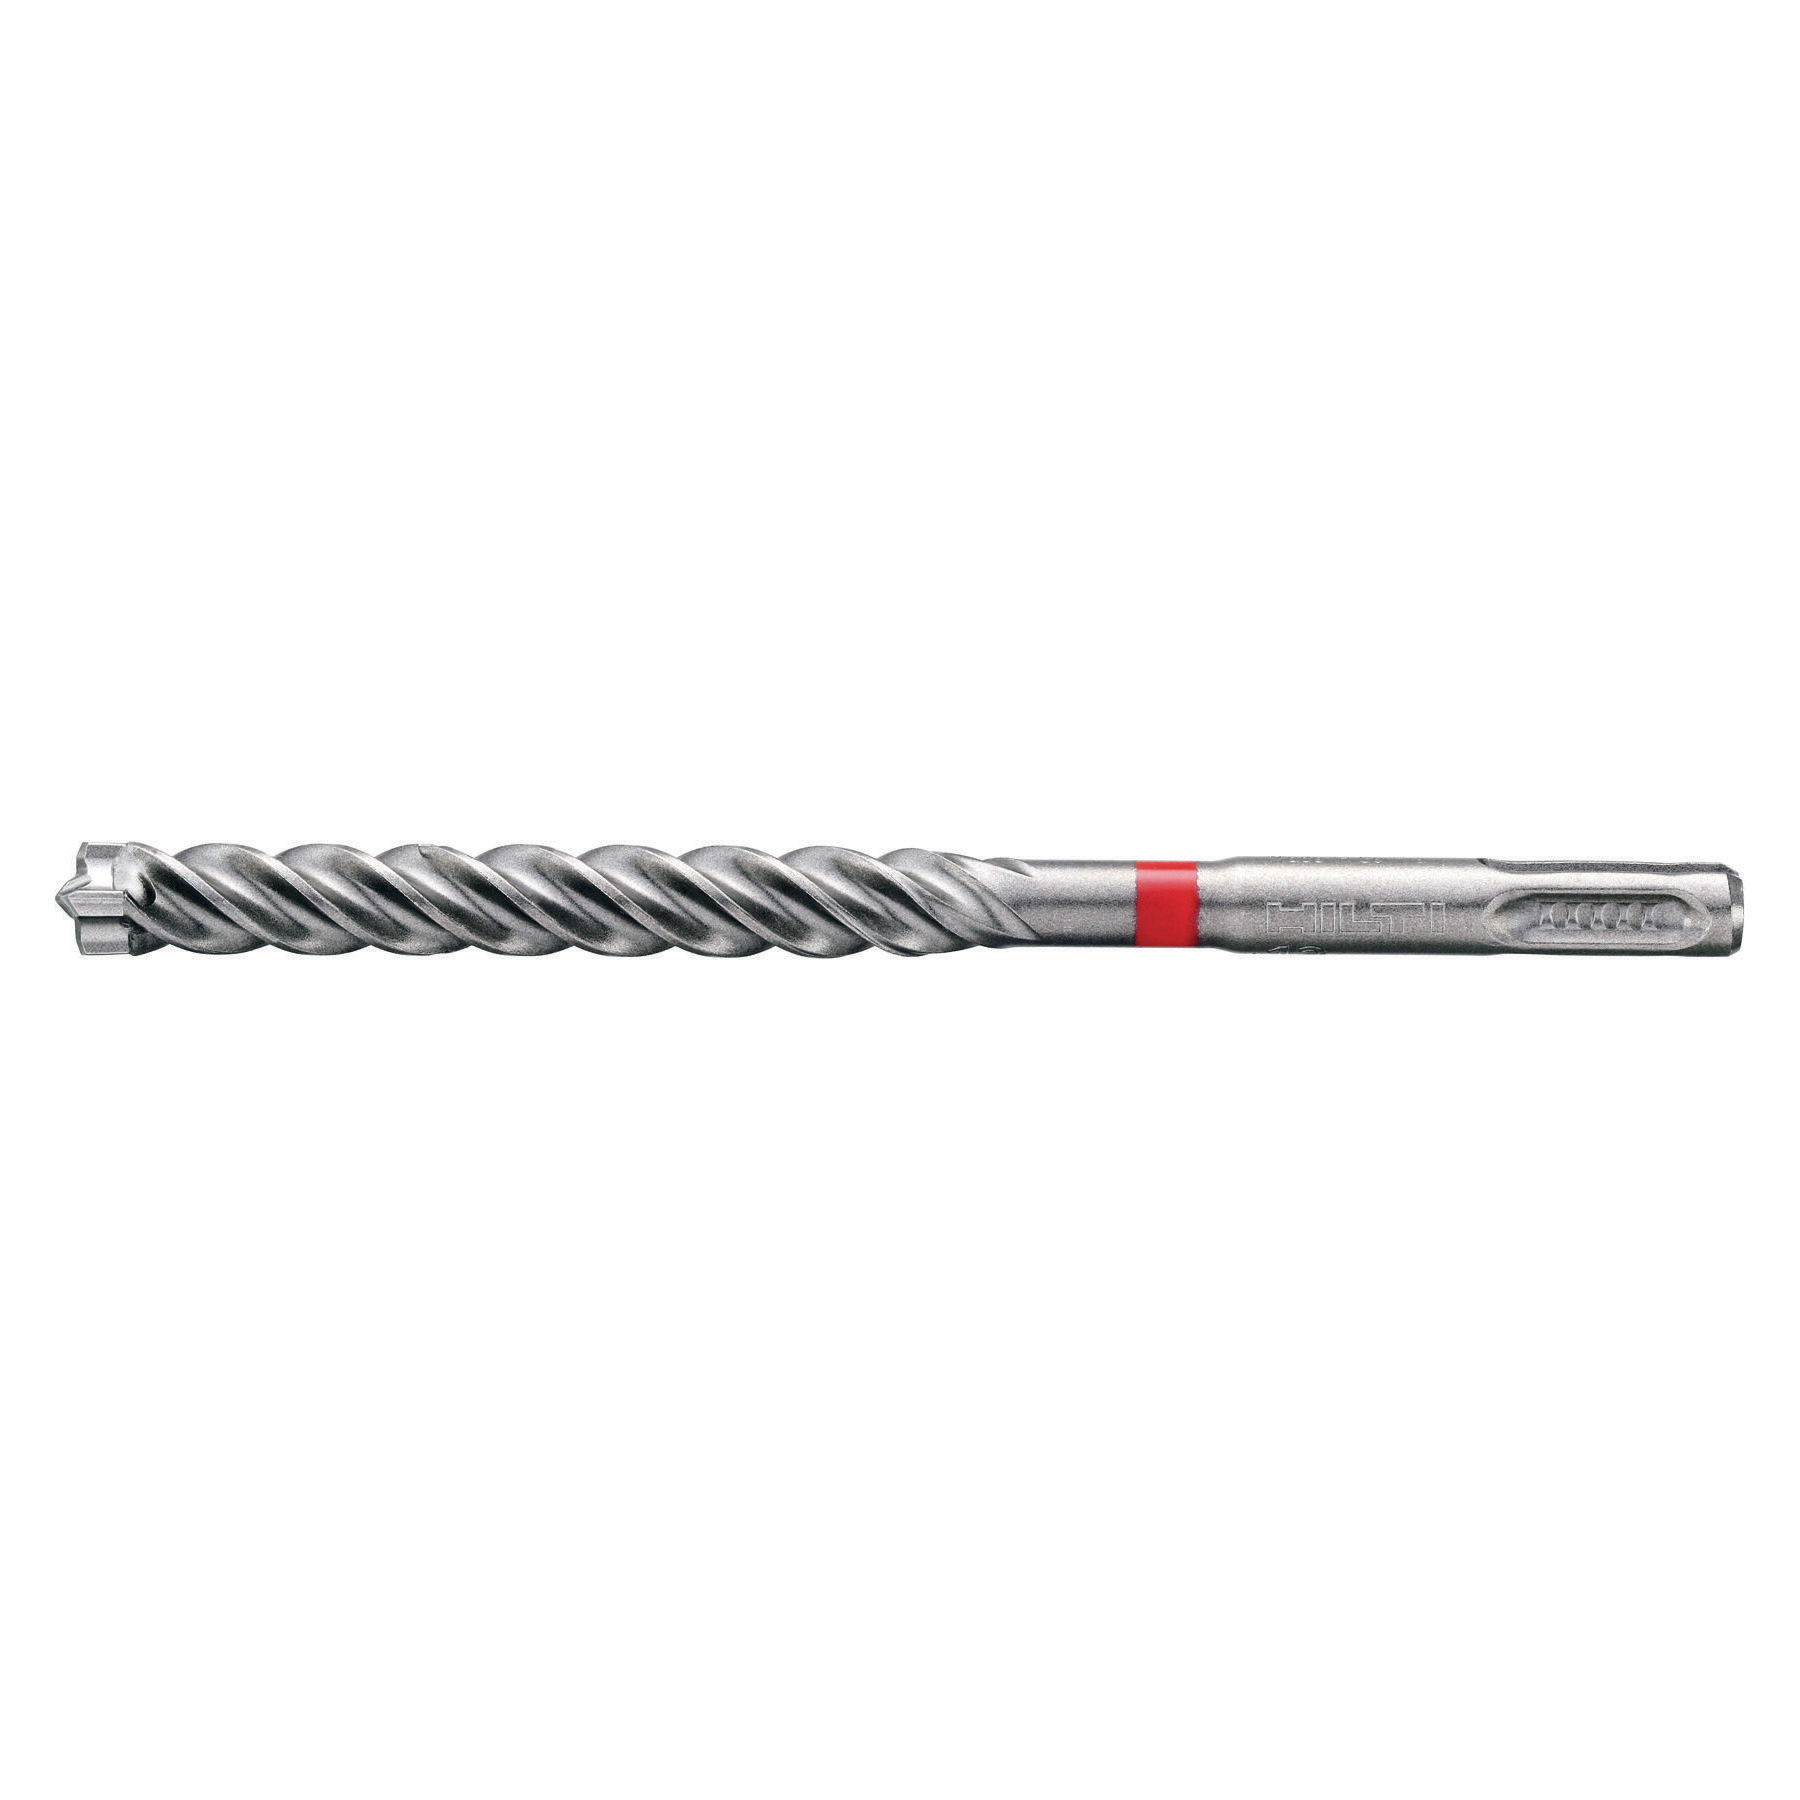 Hilti TE-C Carbide Masonry Drill Bit with SDS Plus Shank 2038073 for sale online 